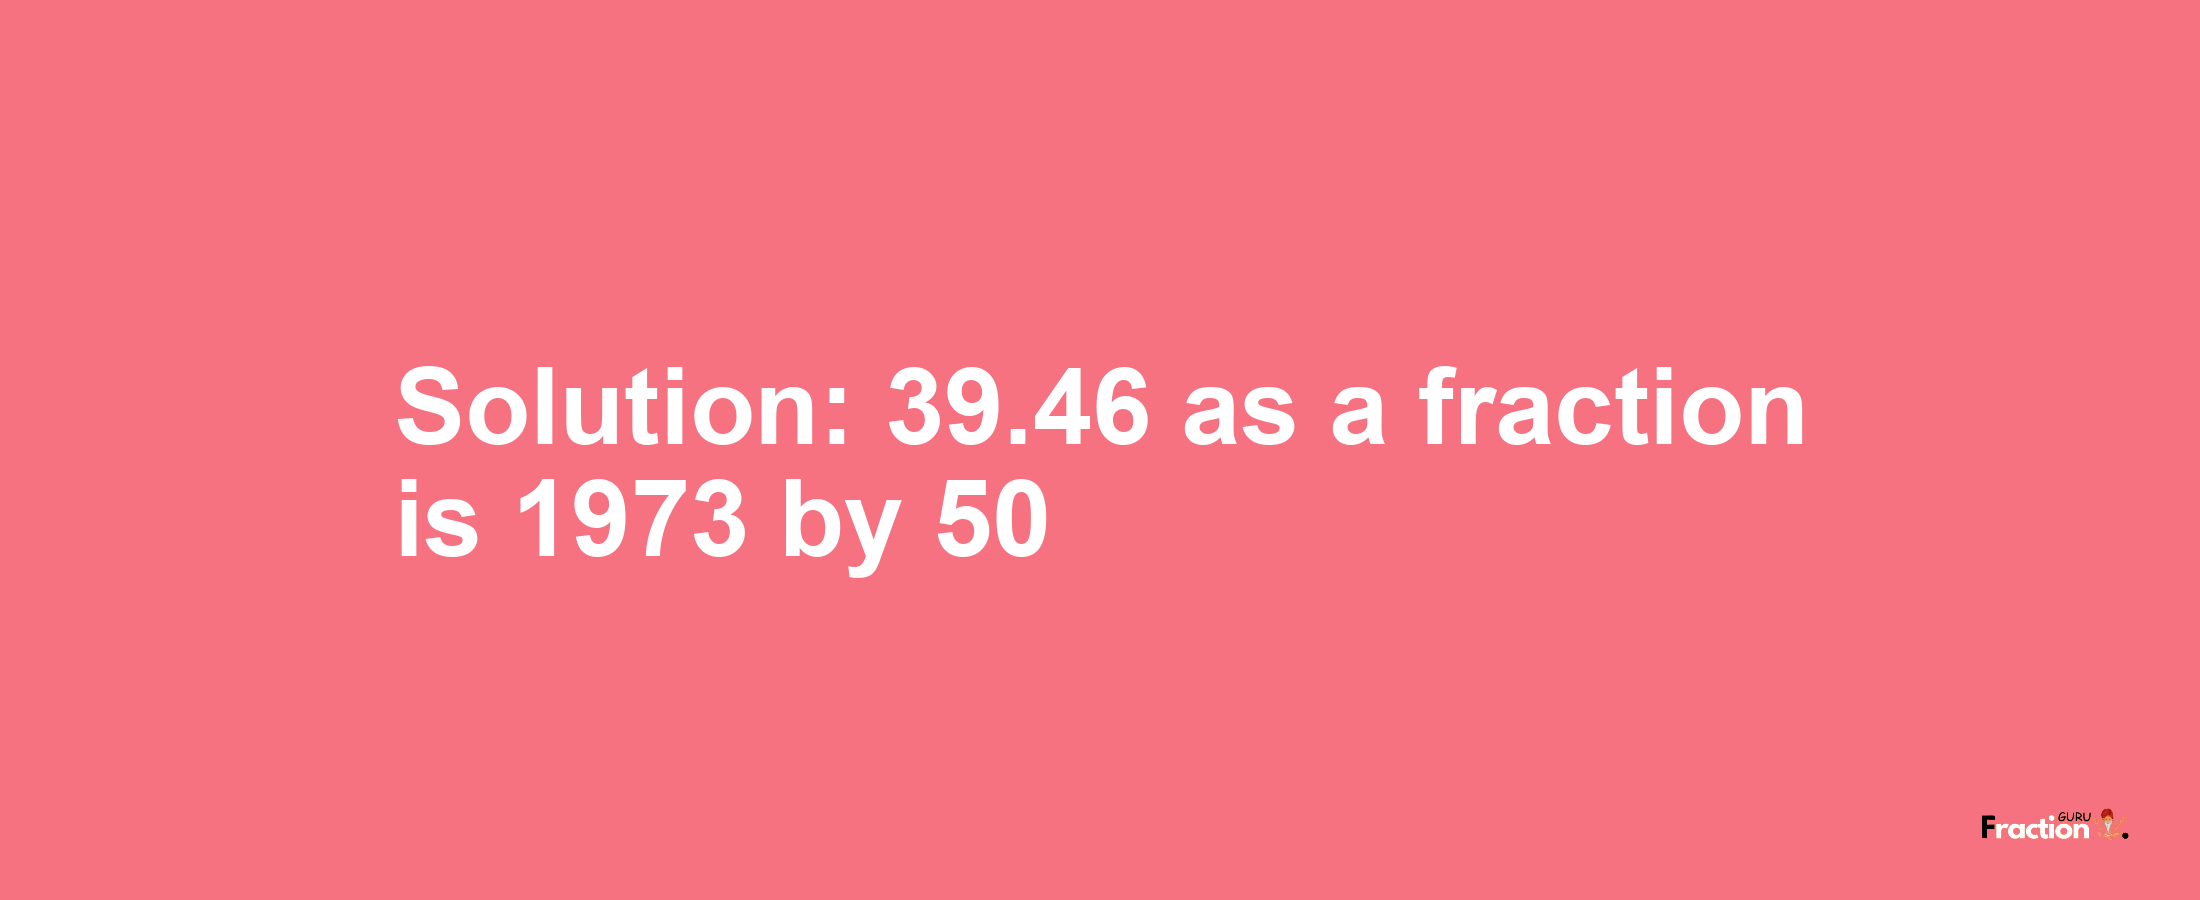 Solution:39.46 as a fraction is 1973/50